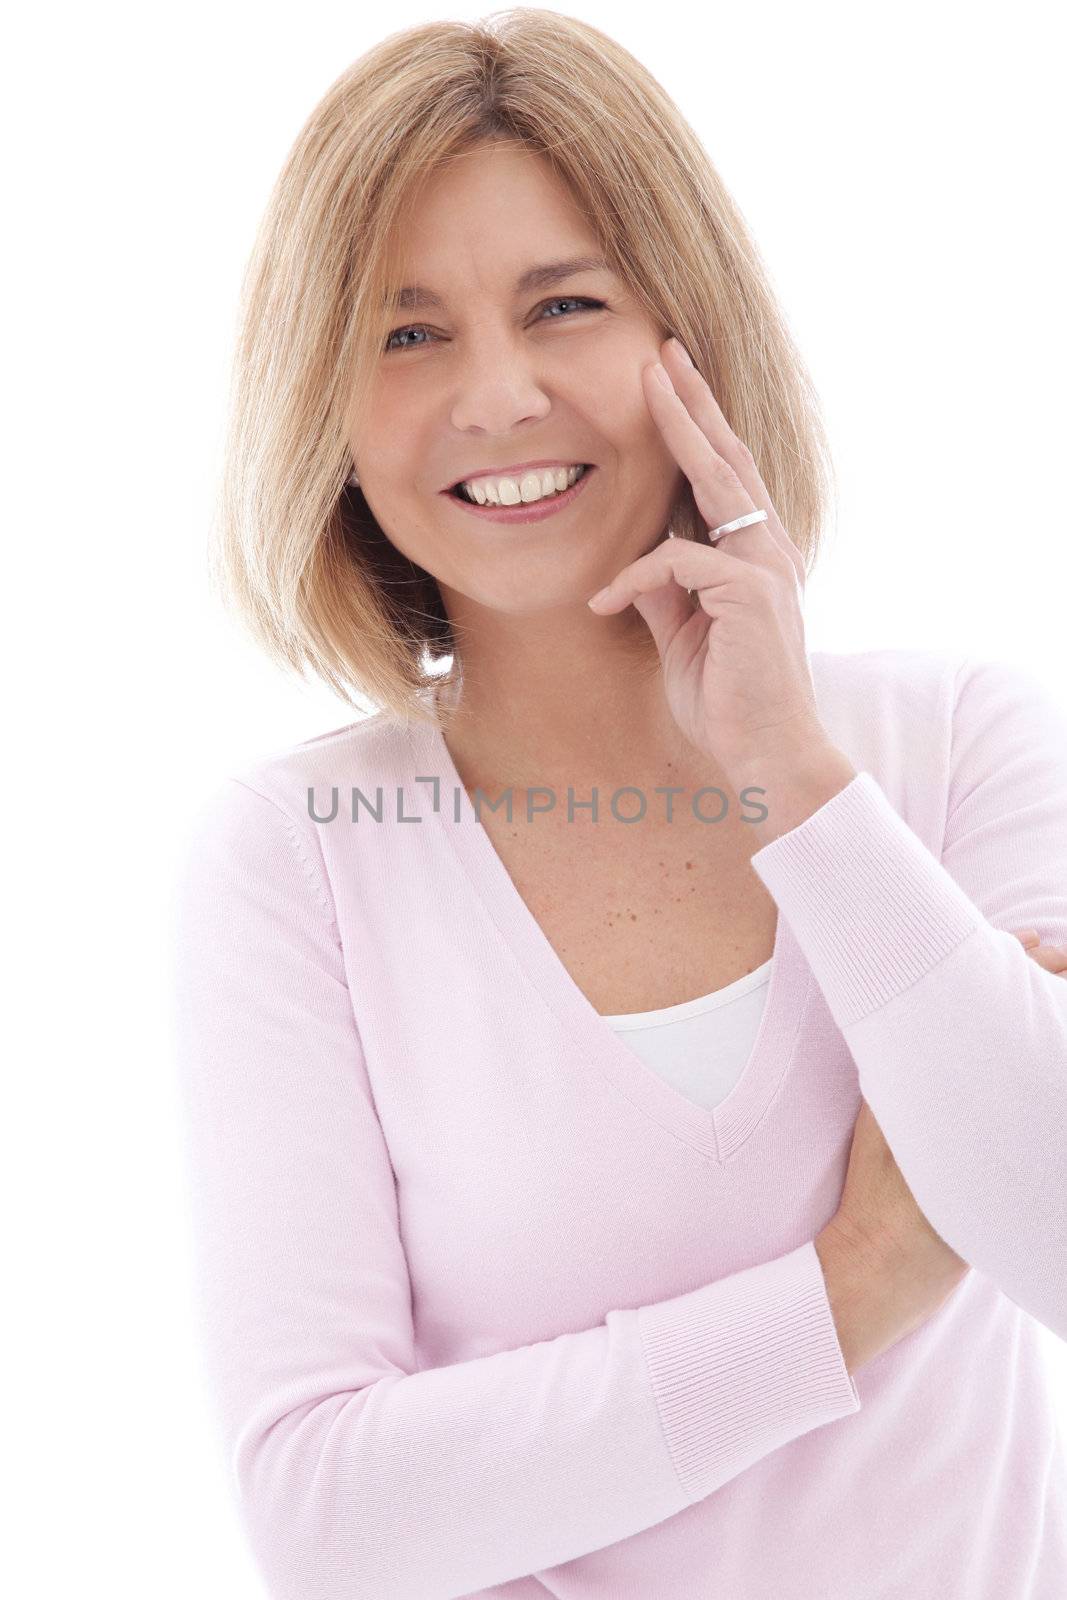 Attractive mature woman with a lively smile by Farina6000